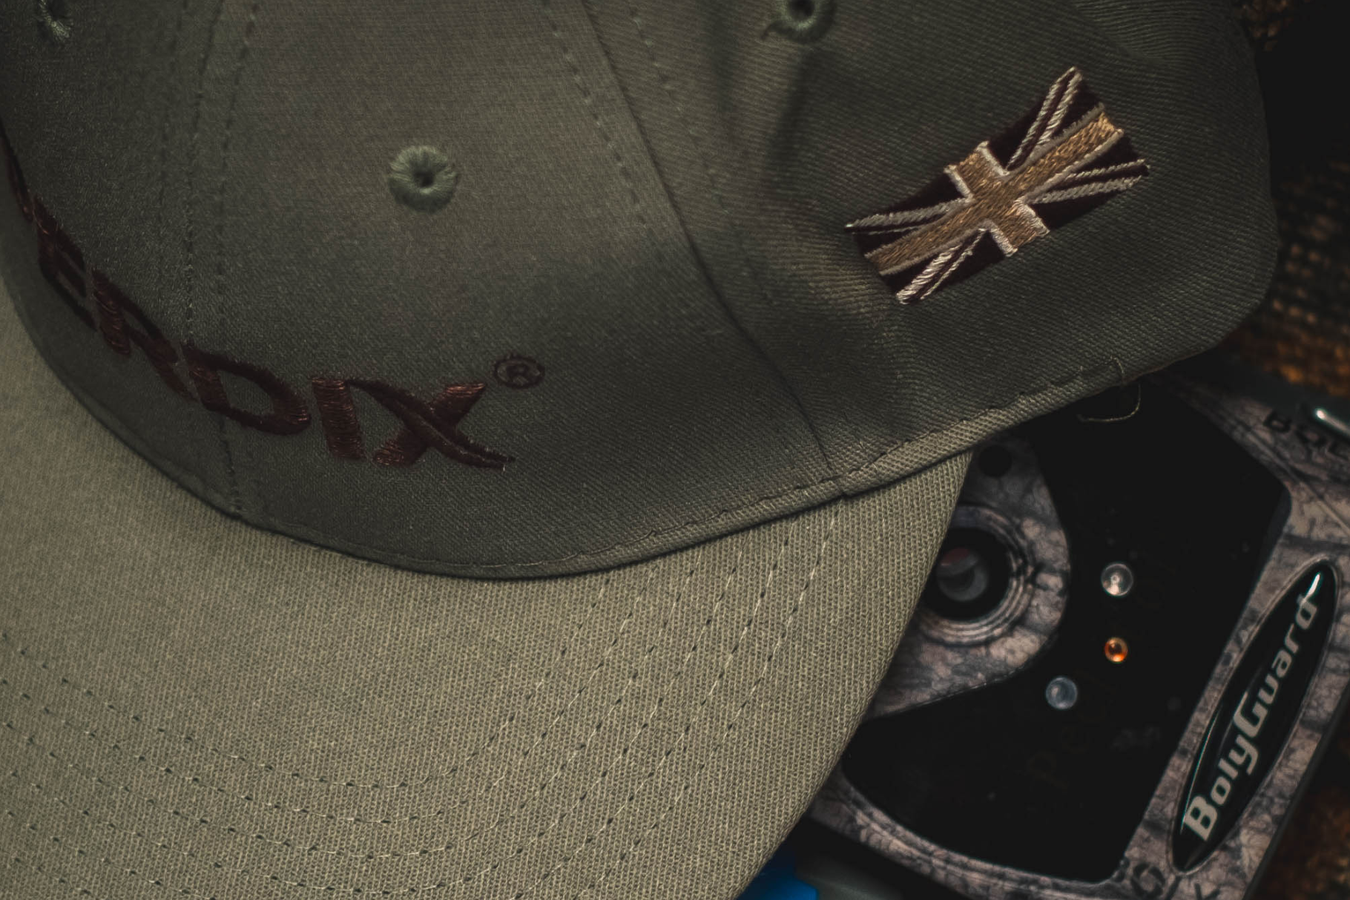 PERDIX branded baseball caps. High quality made in the USA caps with PERDIX logo and Union Jack - Show fellow wildlife professionals you use a quality outfitter for your wildlife equipment.